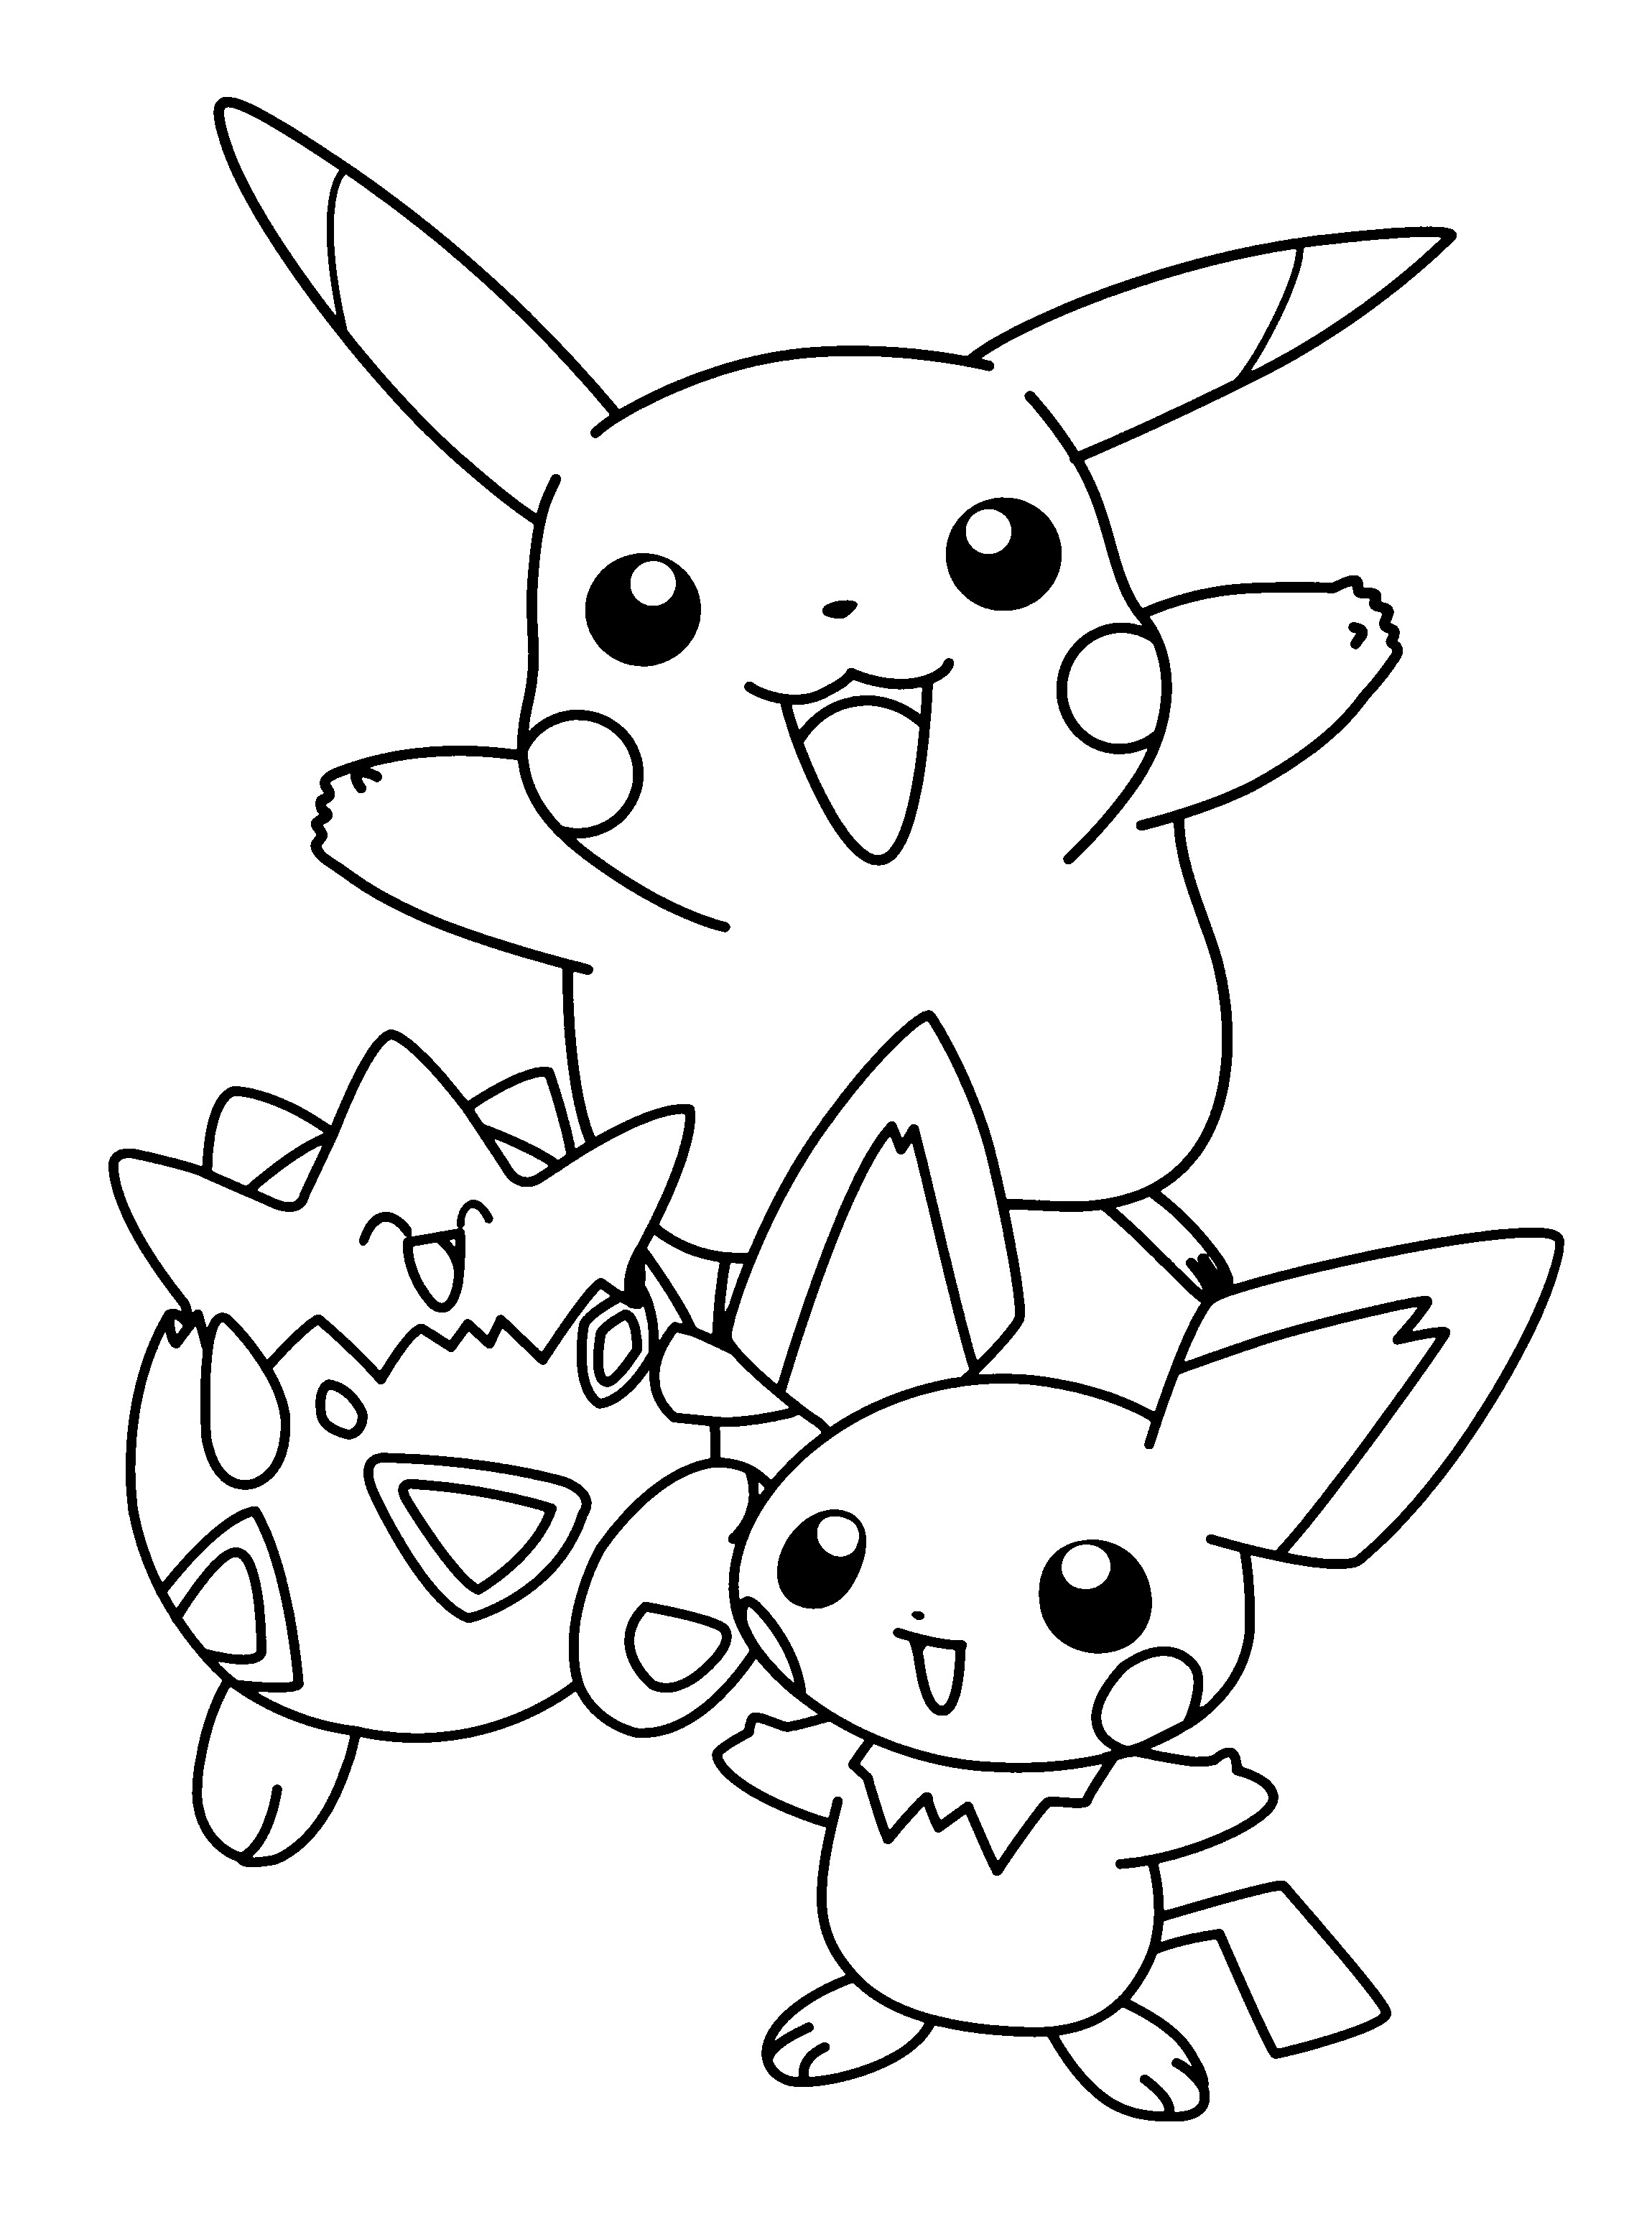 pokemon-friends-coloring-pages-of-pokemon-friends-coloring-pages Pokemon Friends Coloring Pages Cartoon 